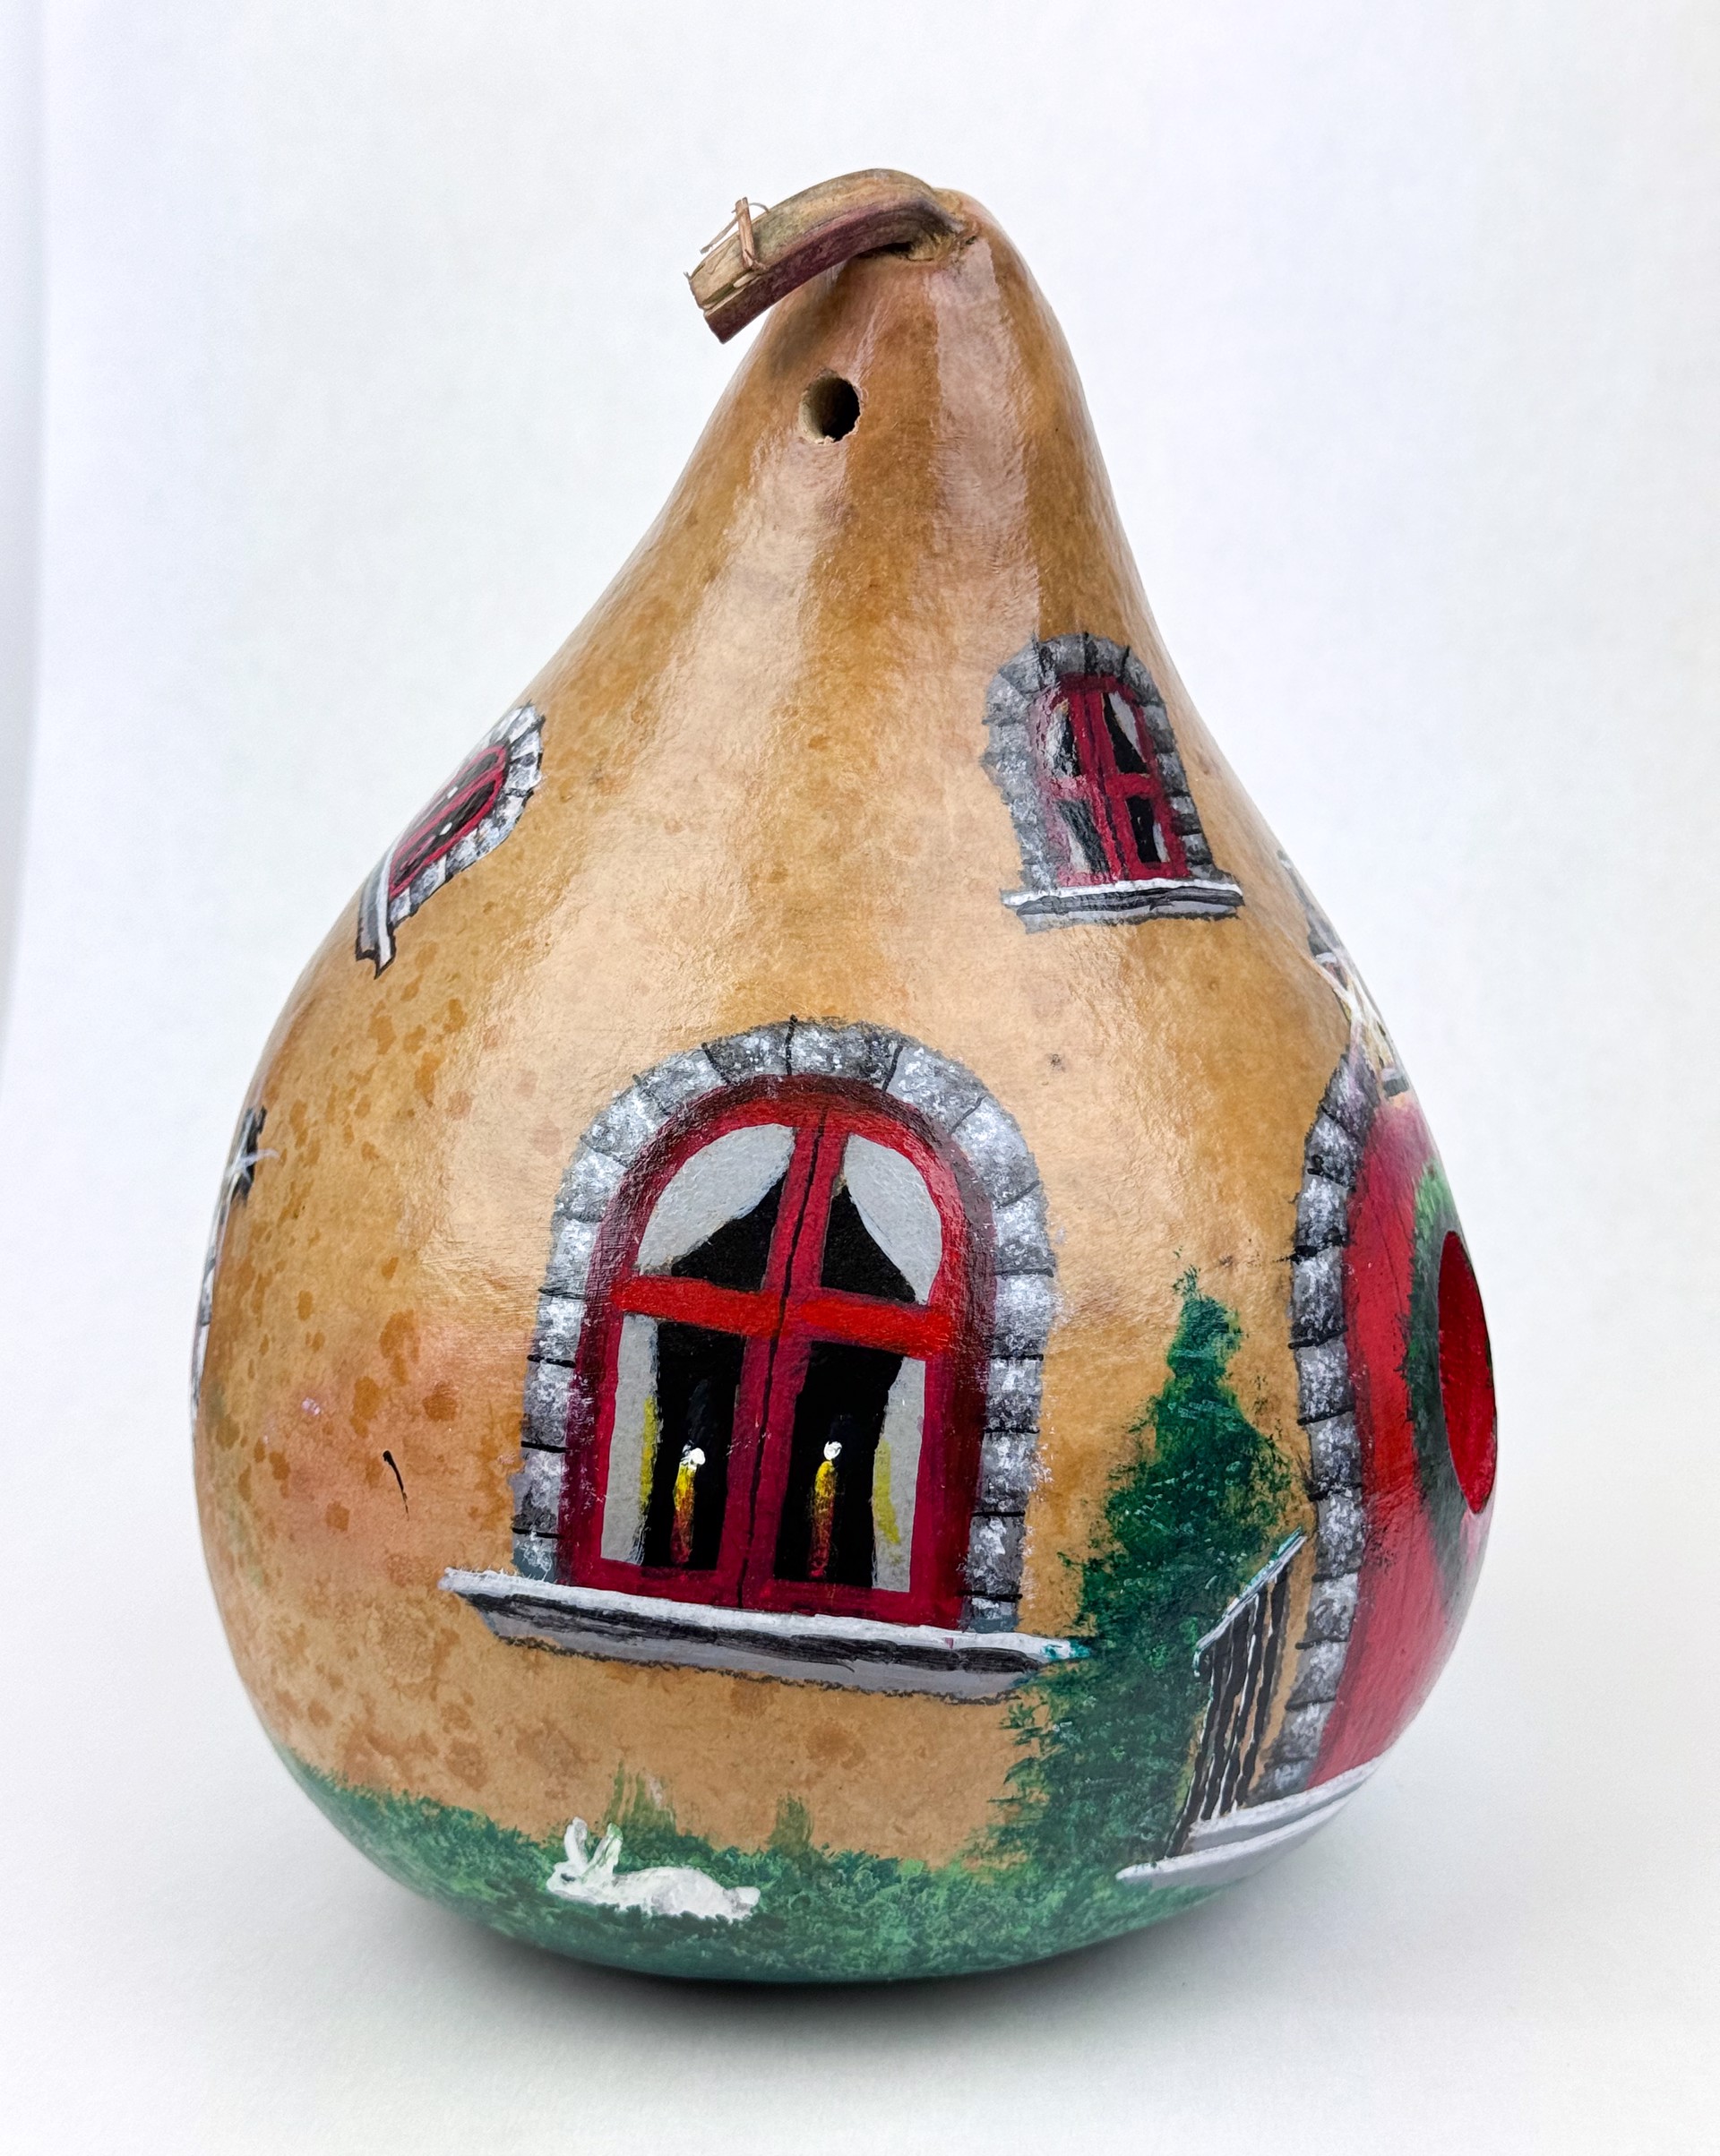 Home for the Holidays (gourd birdhouse) by Mike Knox